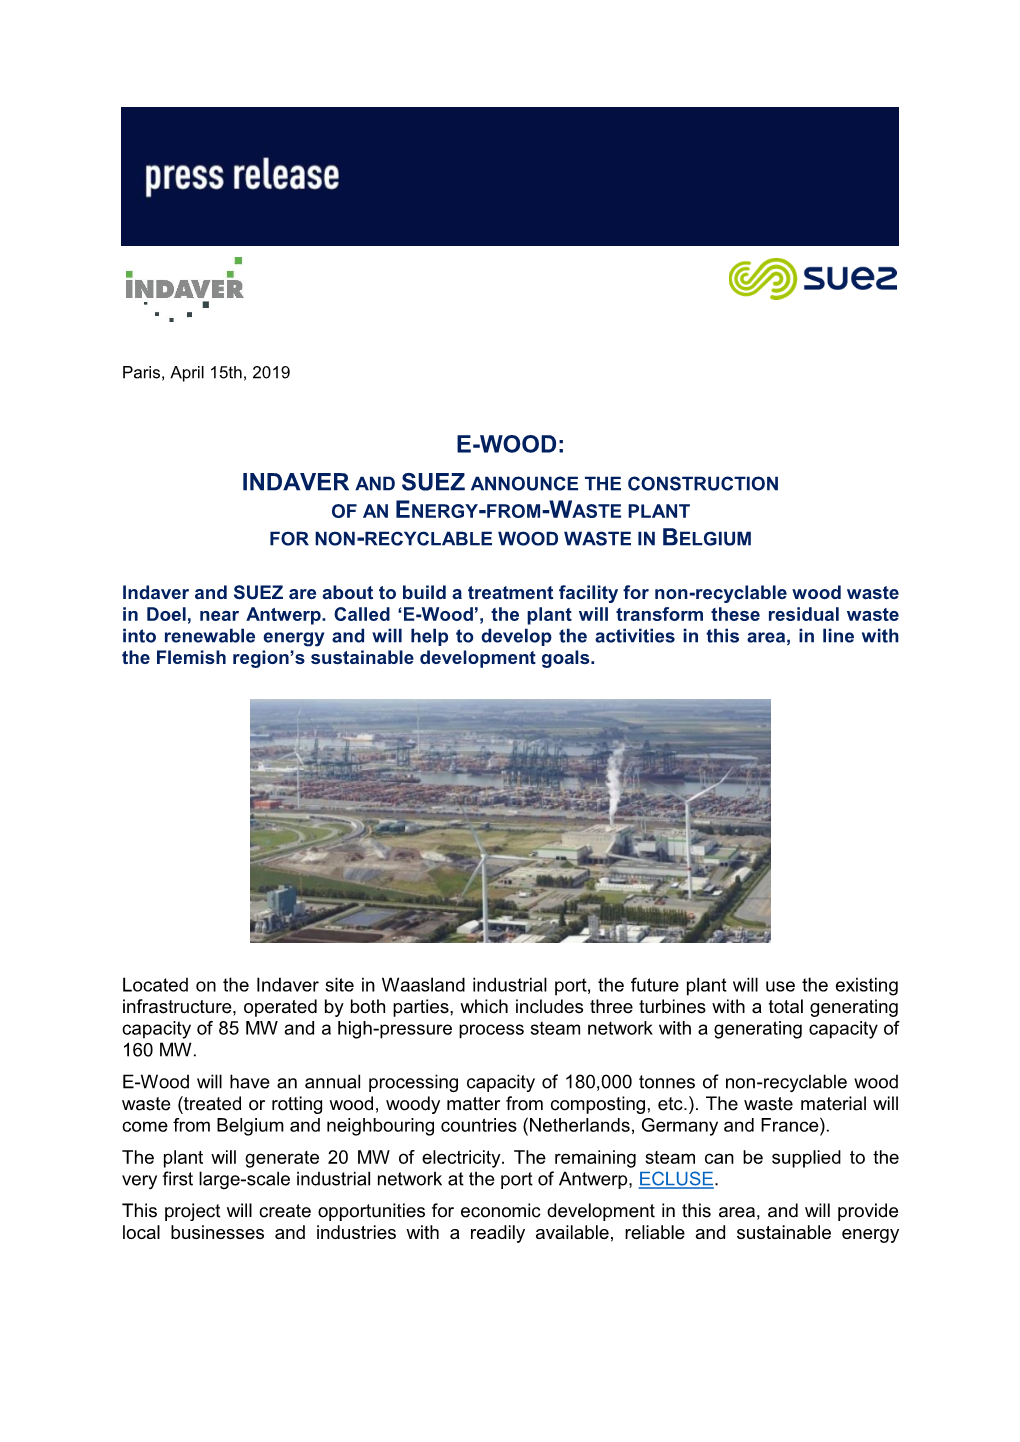 E-Wood: Indaver and Suez Announce the Construction of an Energy-From-Waste Plant for Non-Recyclable Wood Waste in Belgium